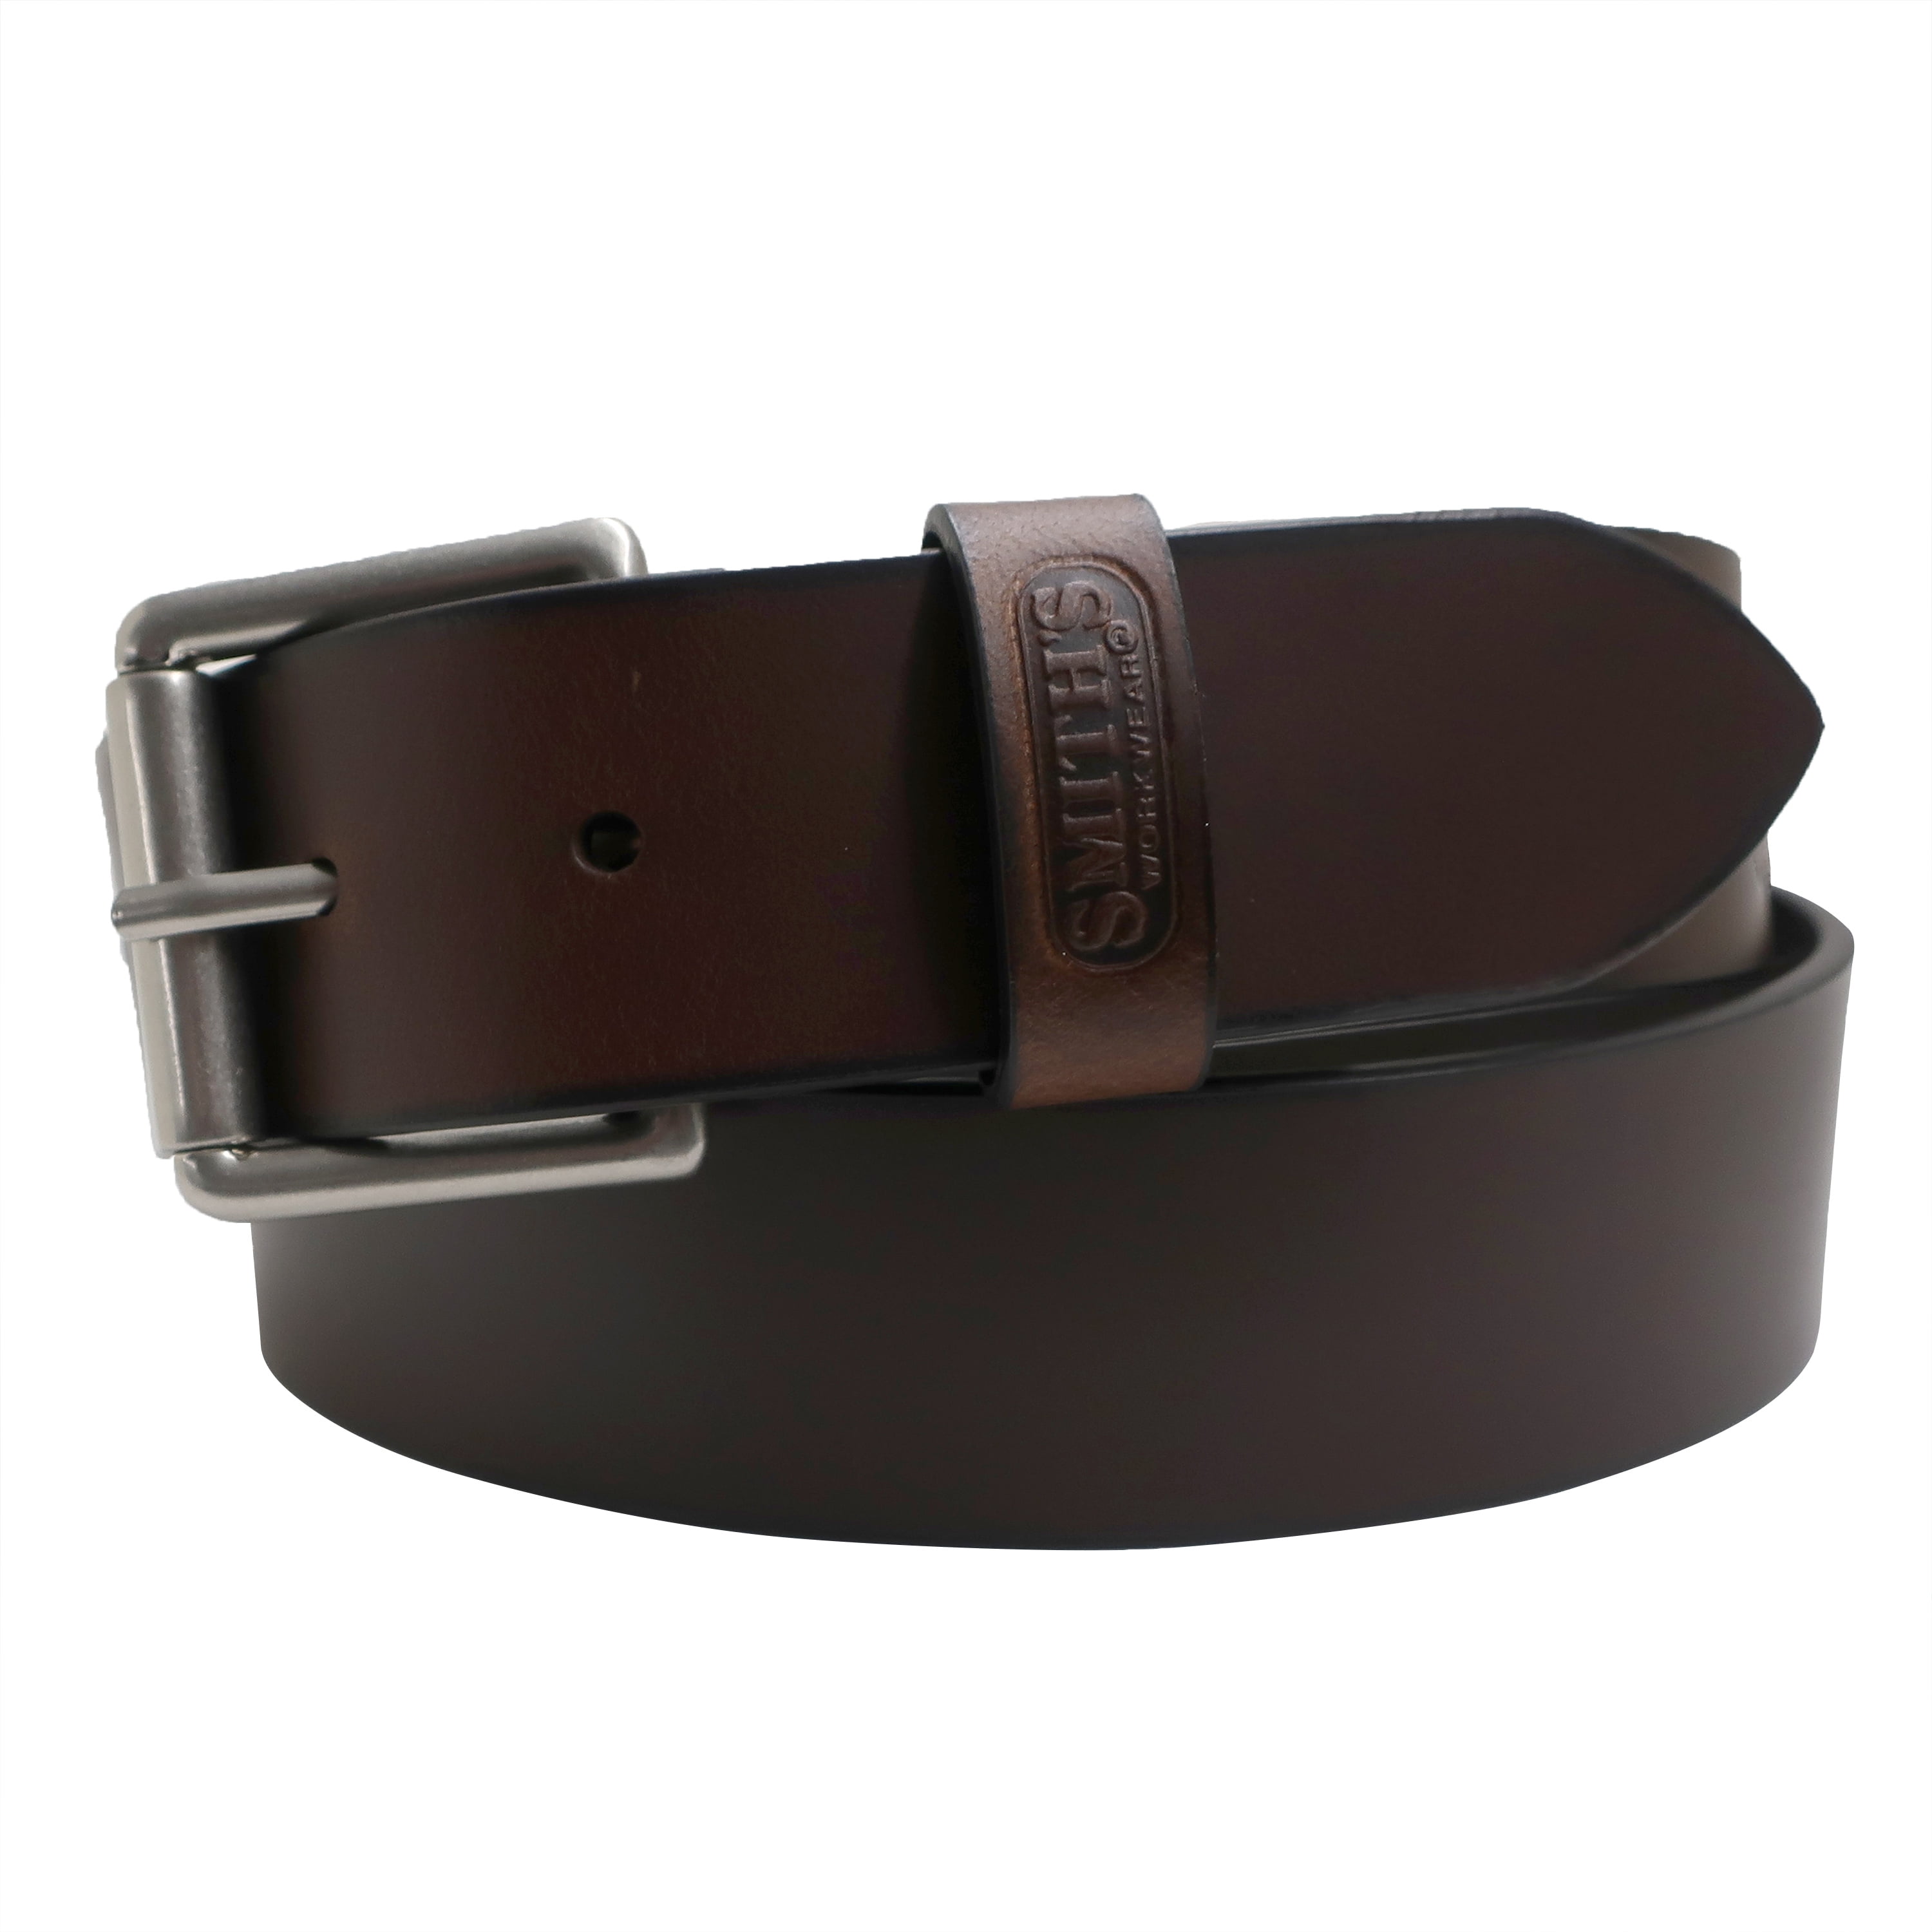 SENDEFN Men's Belt Full Grain Leather Belts with Single Prong Buckle Trim  to Fit, Gift Box at  Men’s Clothing store